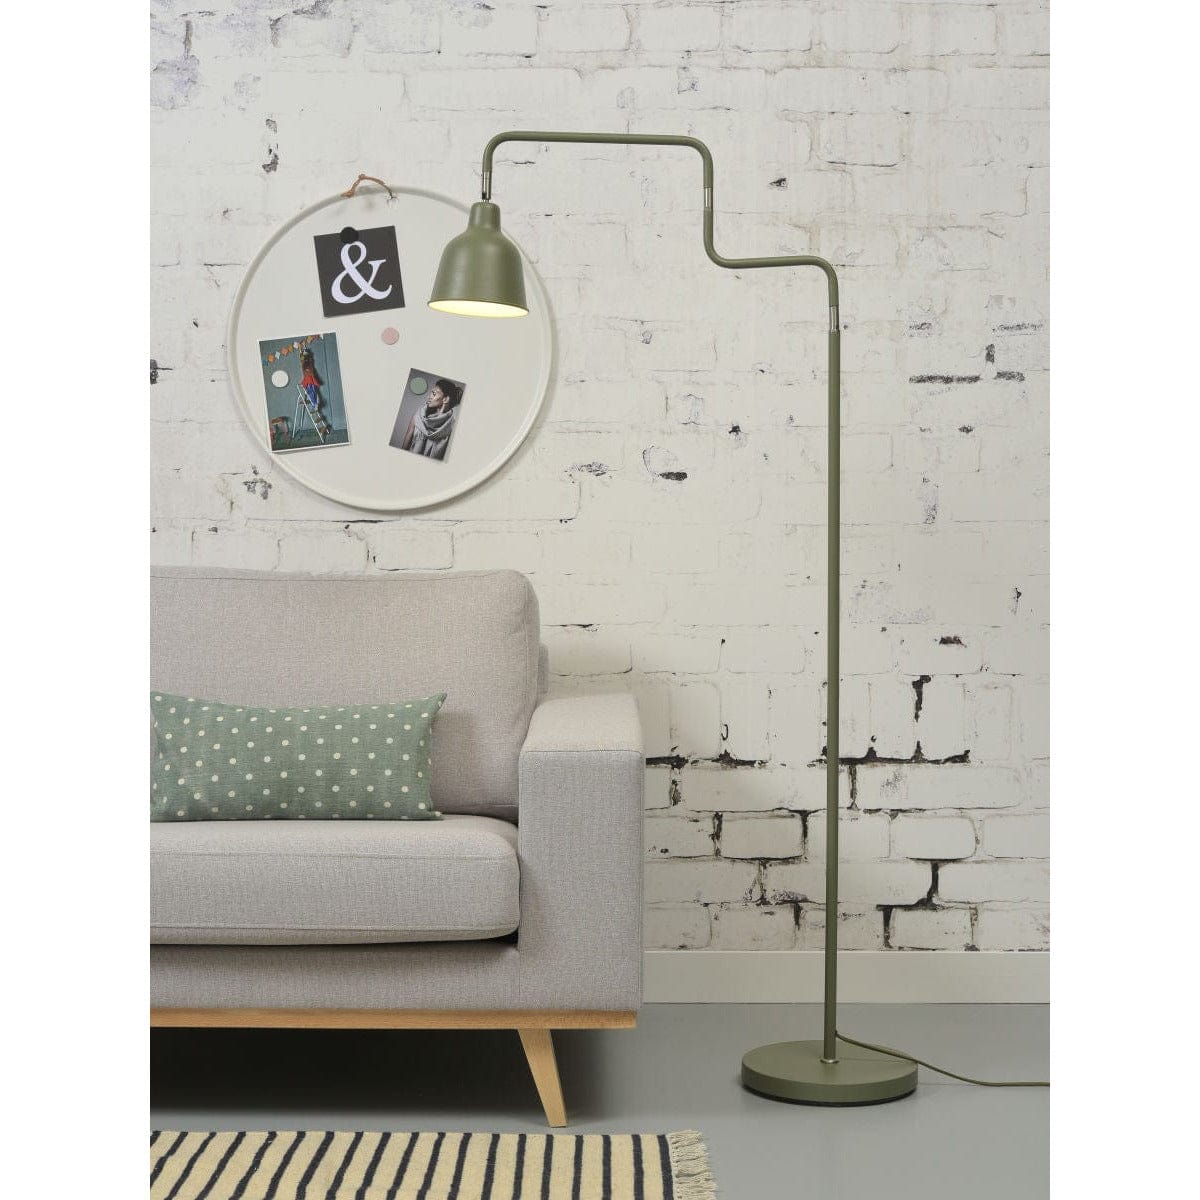 It's About RoMi Floor Lamp Olive Green London Floor Lamp, Olive Green or Black